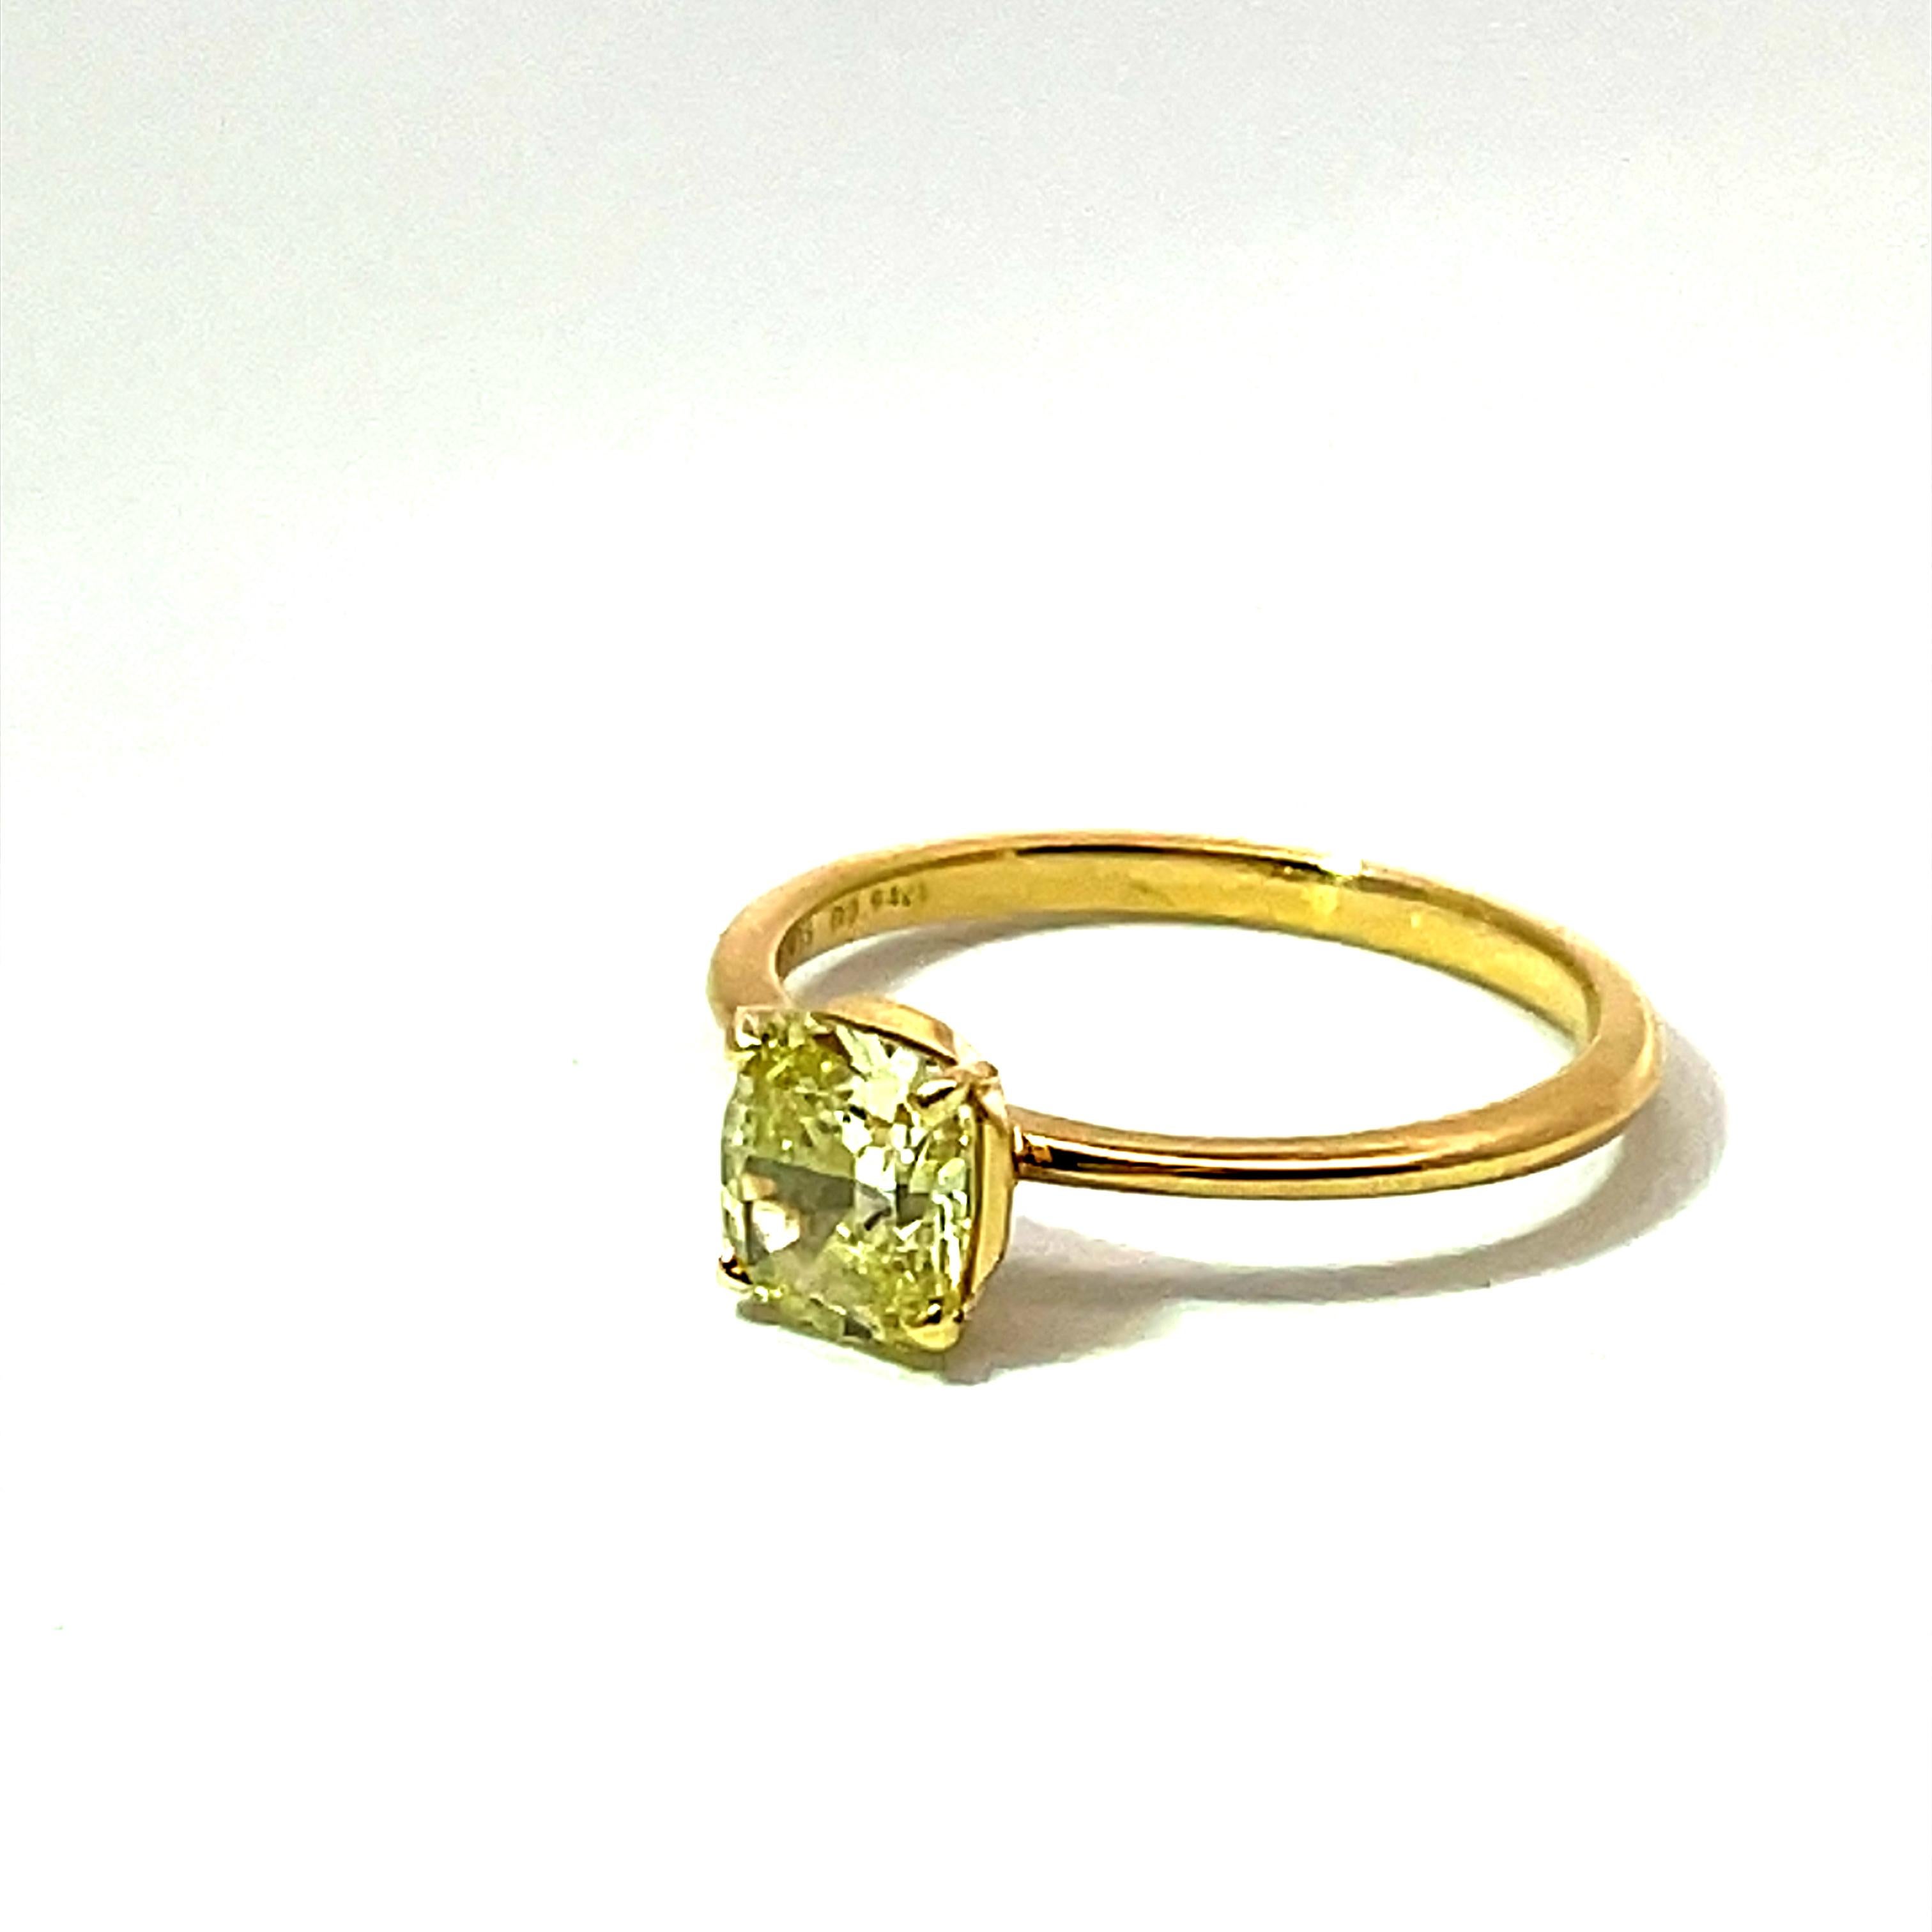 Tiffany & Co. 0.94ct Fancy Yellow Diamond with 18k Yellow Gold Engagement Ring 2